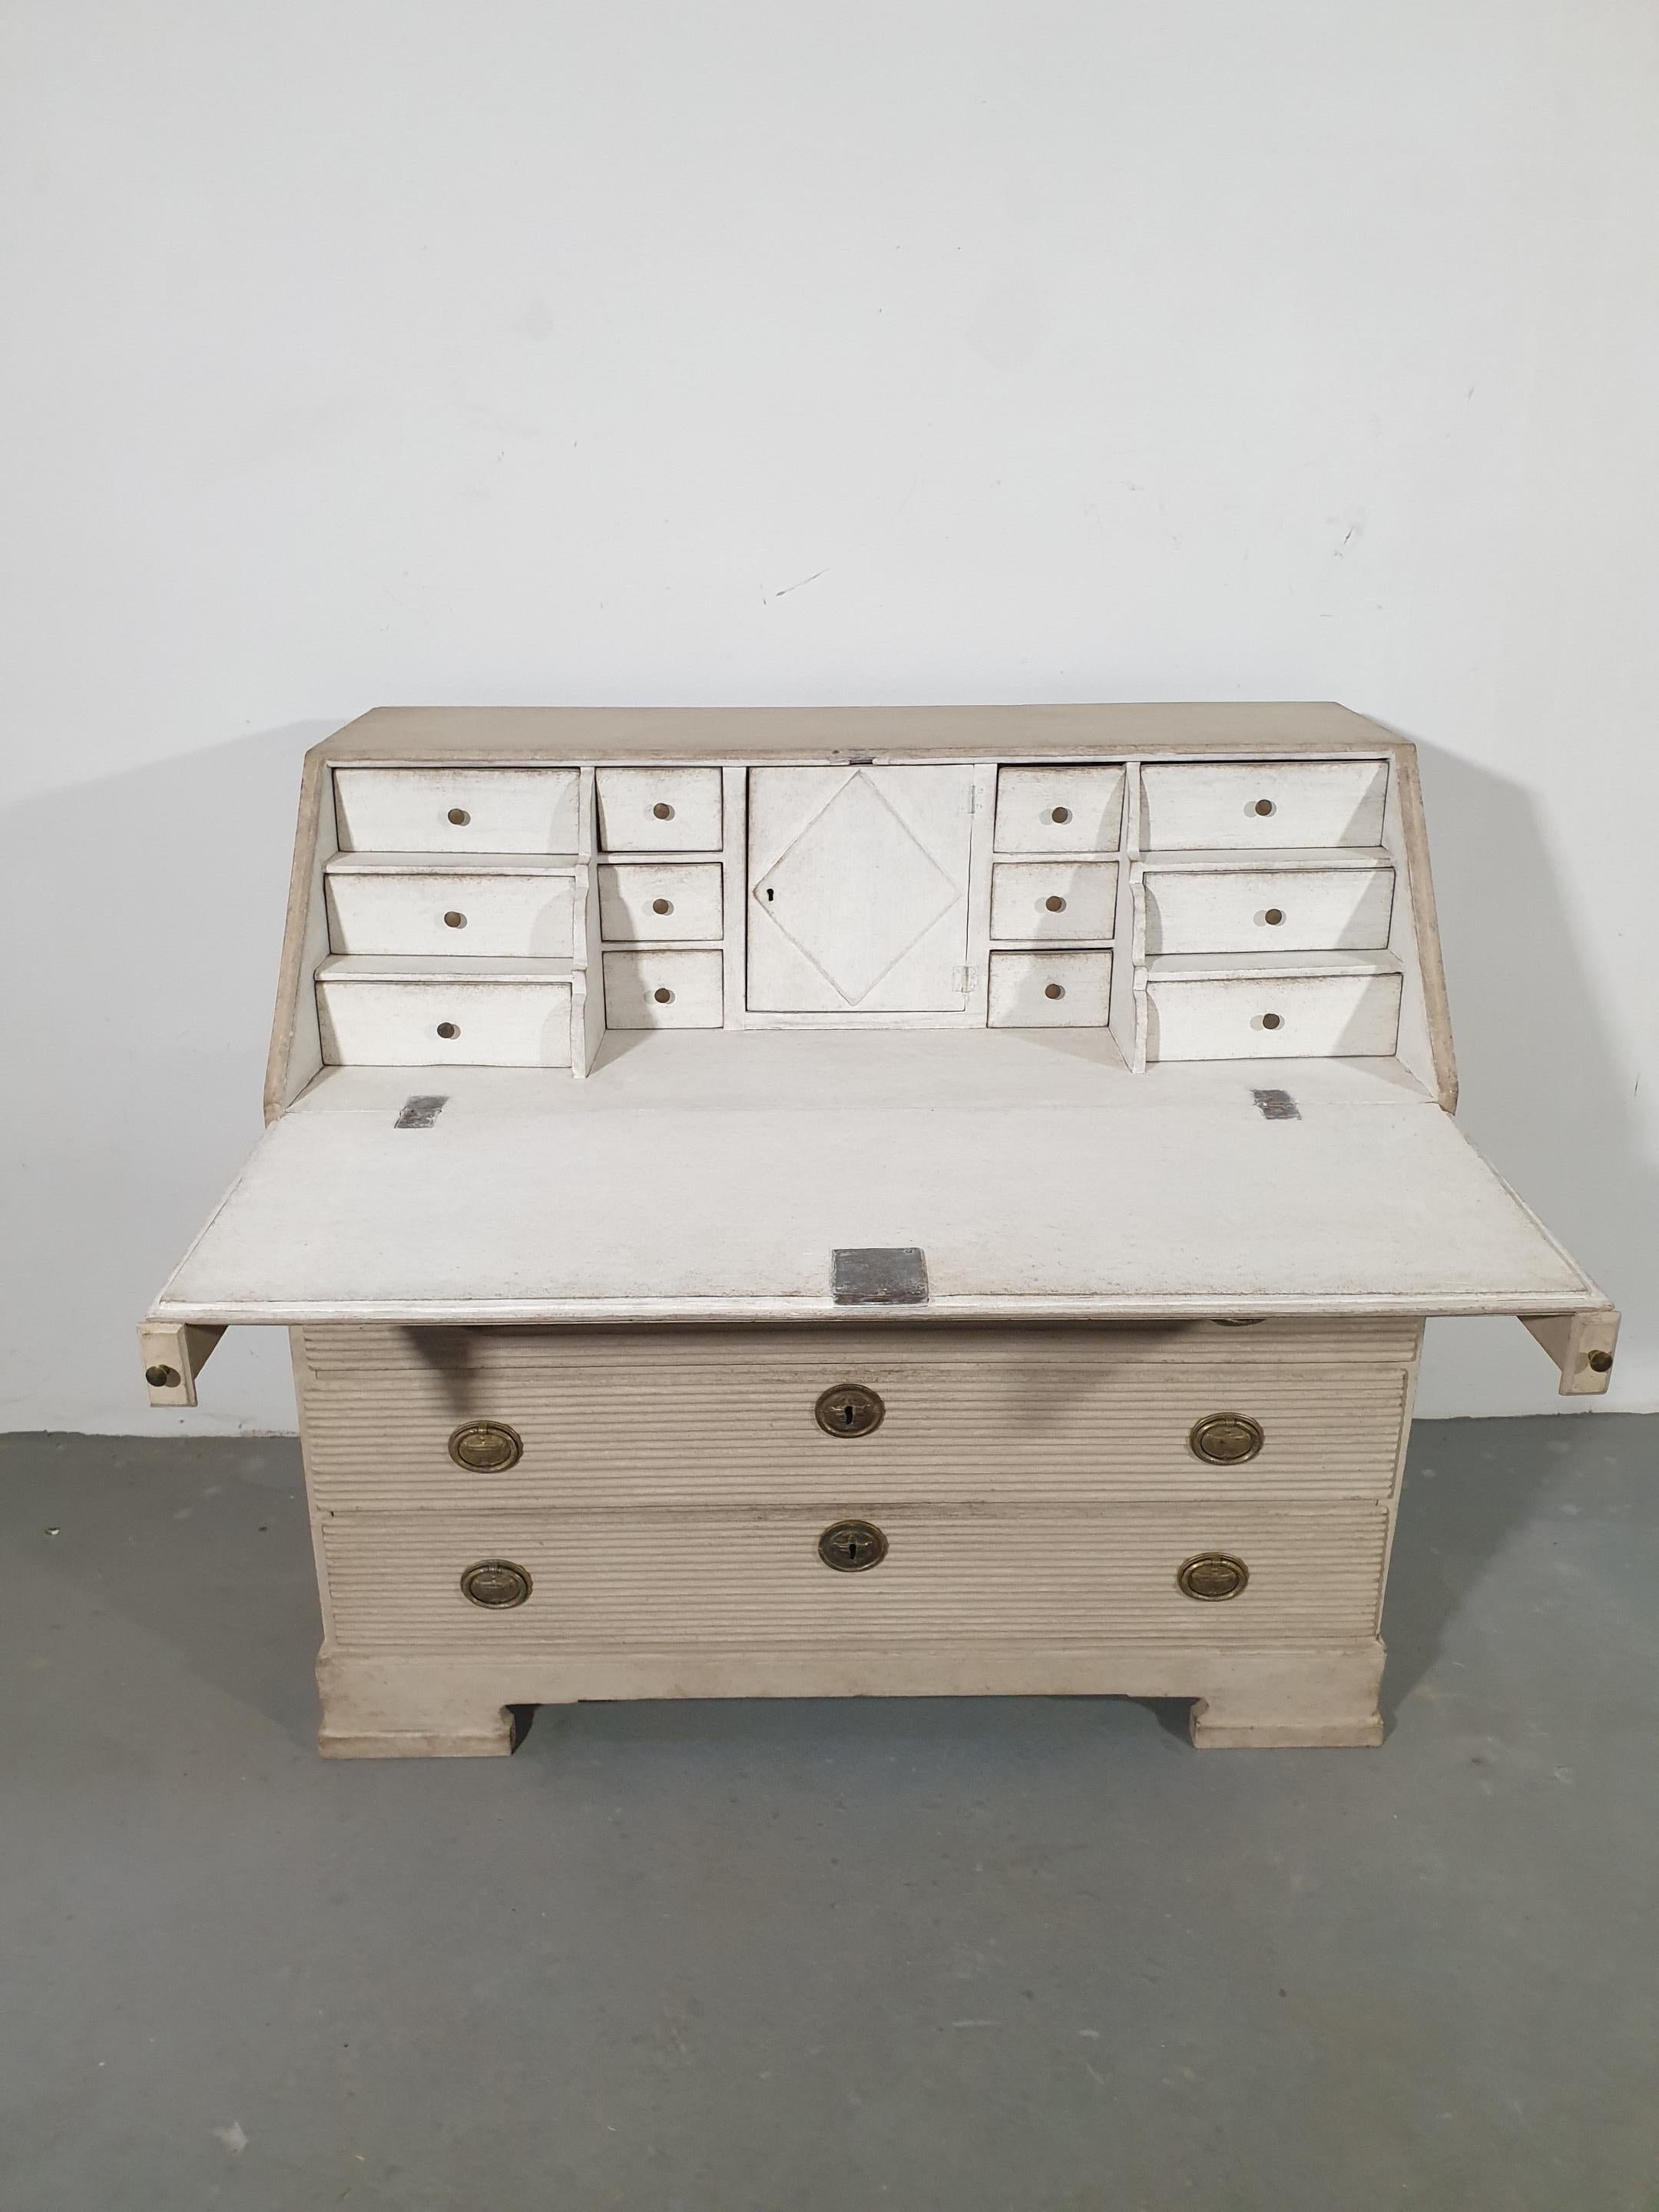 A Swedish Late Gustavian period secretary from circa 1820, with tan/cream painted finish, slant-front desk, five drawers, carved reeded motifs and bracket feet. Embrace the timeless elegance of the Swedish Late Gustavian period with this exquisite